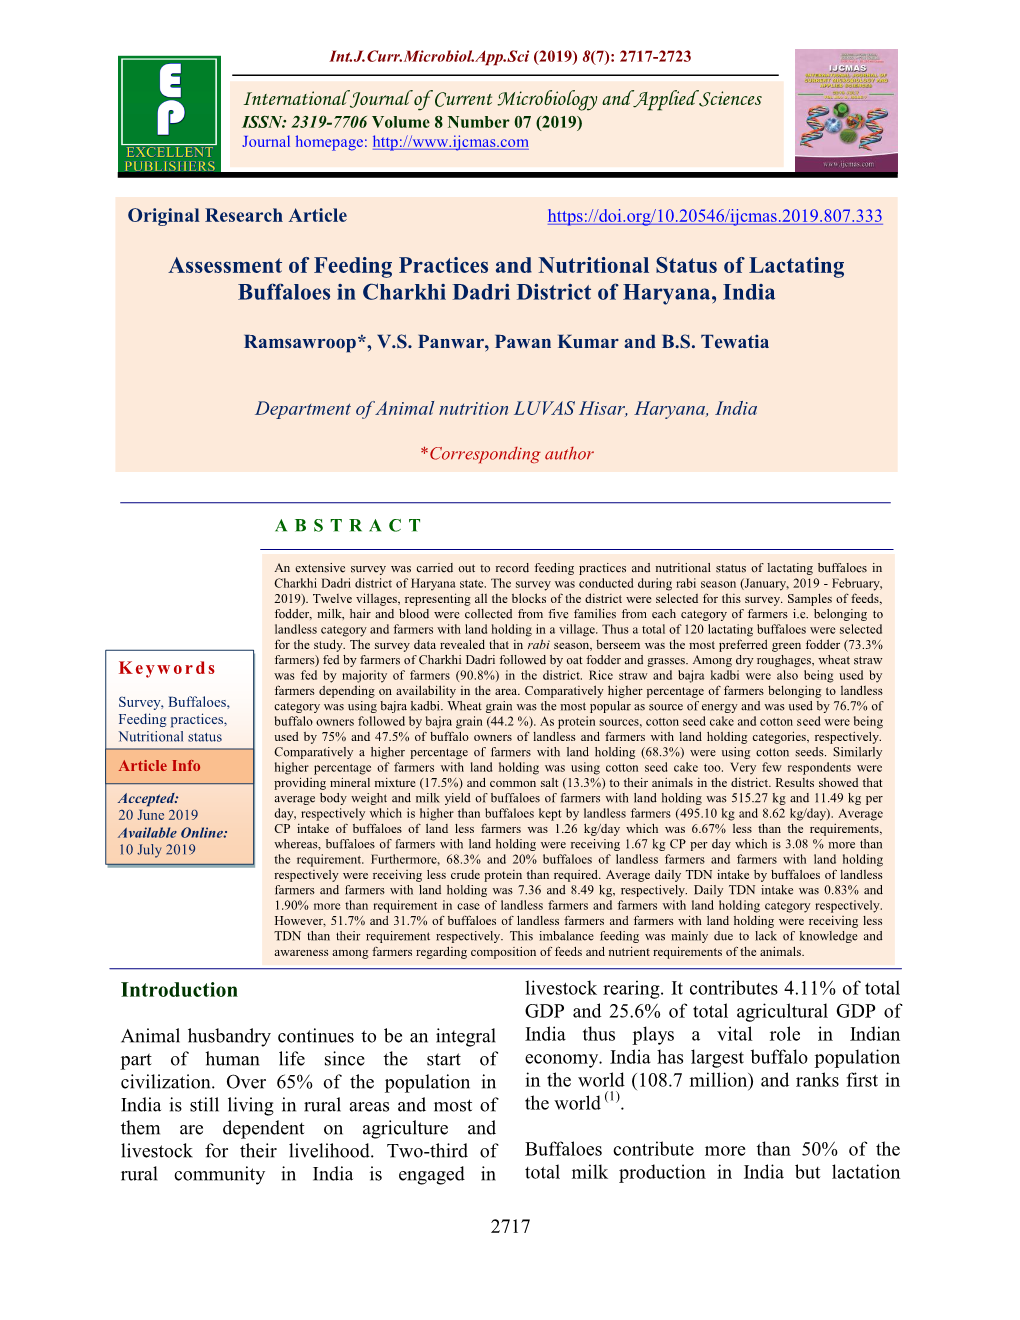 Assessment of Feeding Practices and Nutritional Status of Lactating Buffaloes in Charkhi Dadri District of Haryana, India